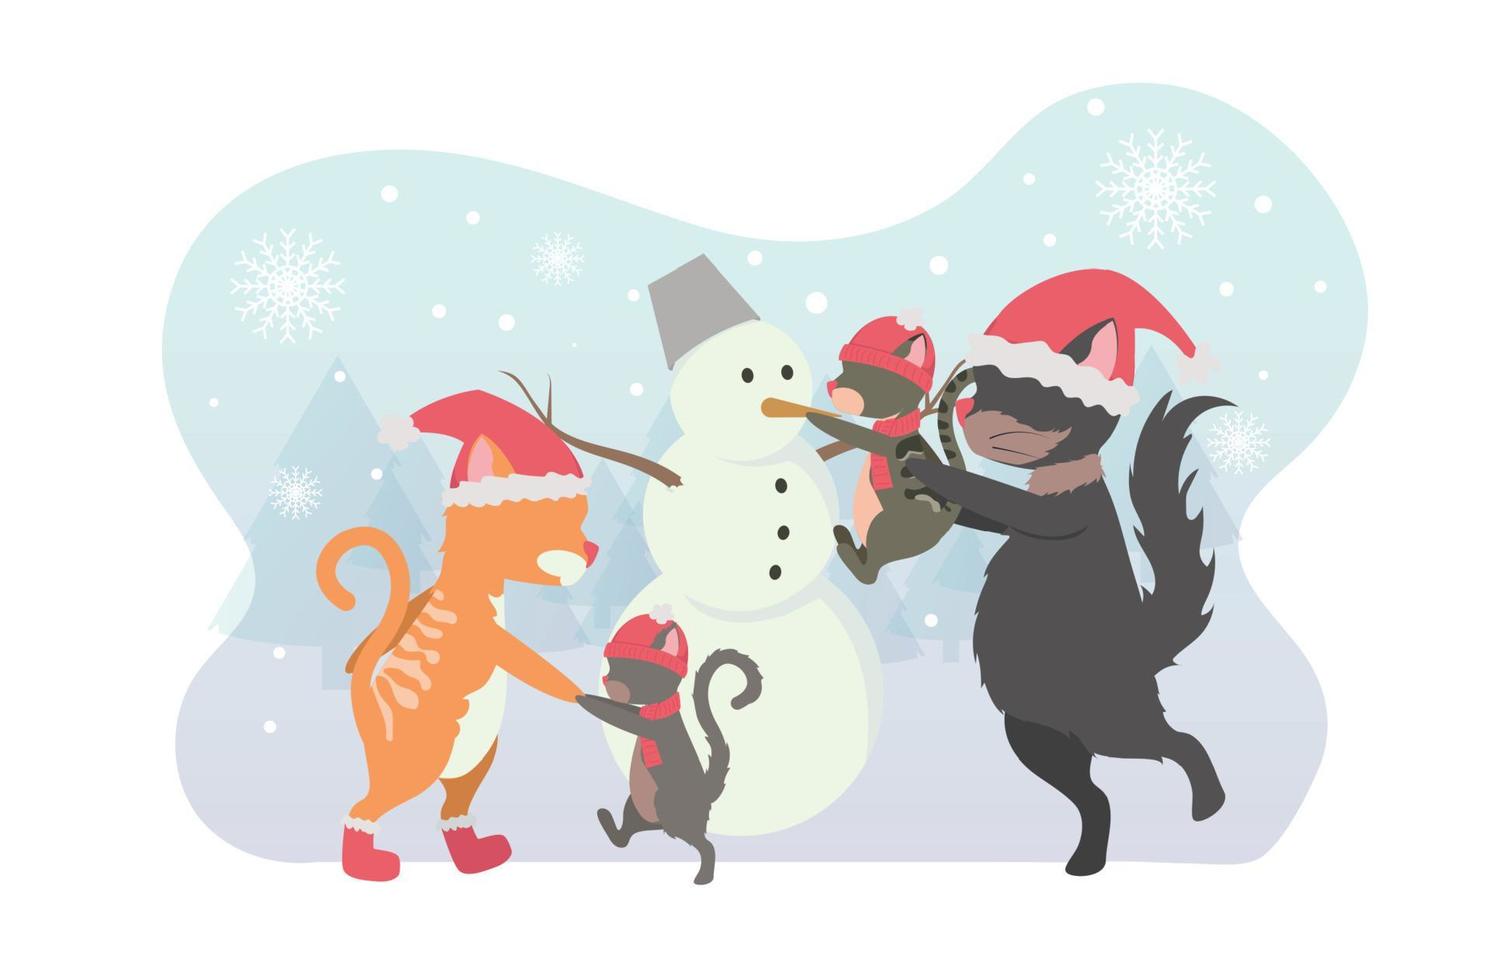 New Year. Christmas. Cats with kittens in New Year's hats and scarves near a snowman, against the background of a Christmas tree, snowflakes. Vector illustration